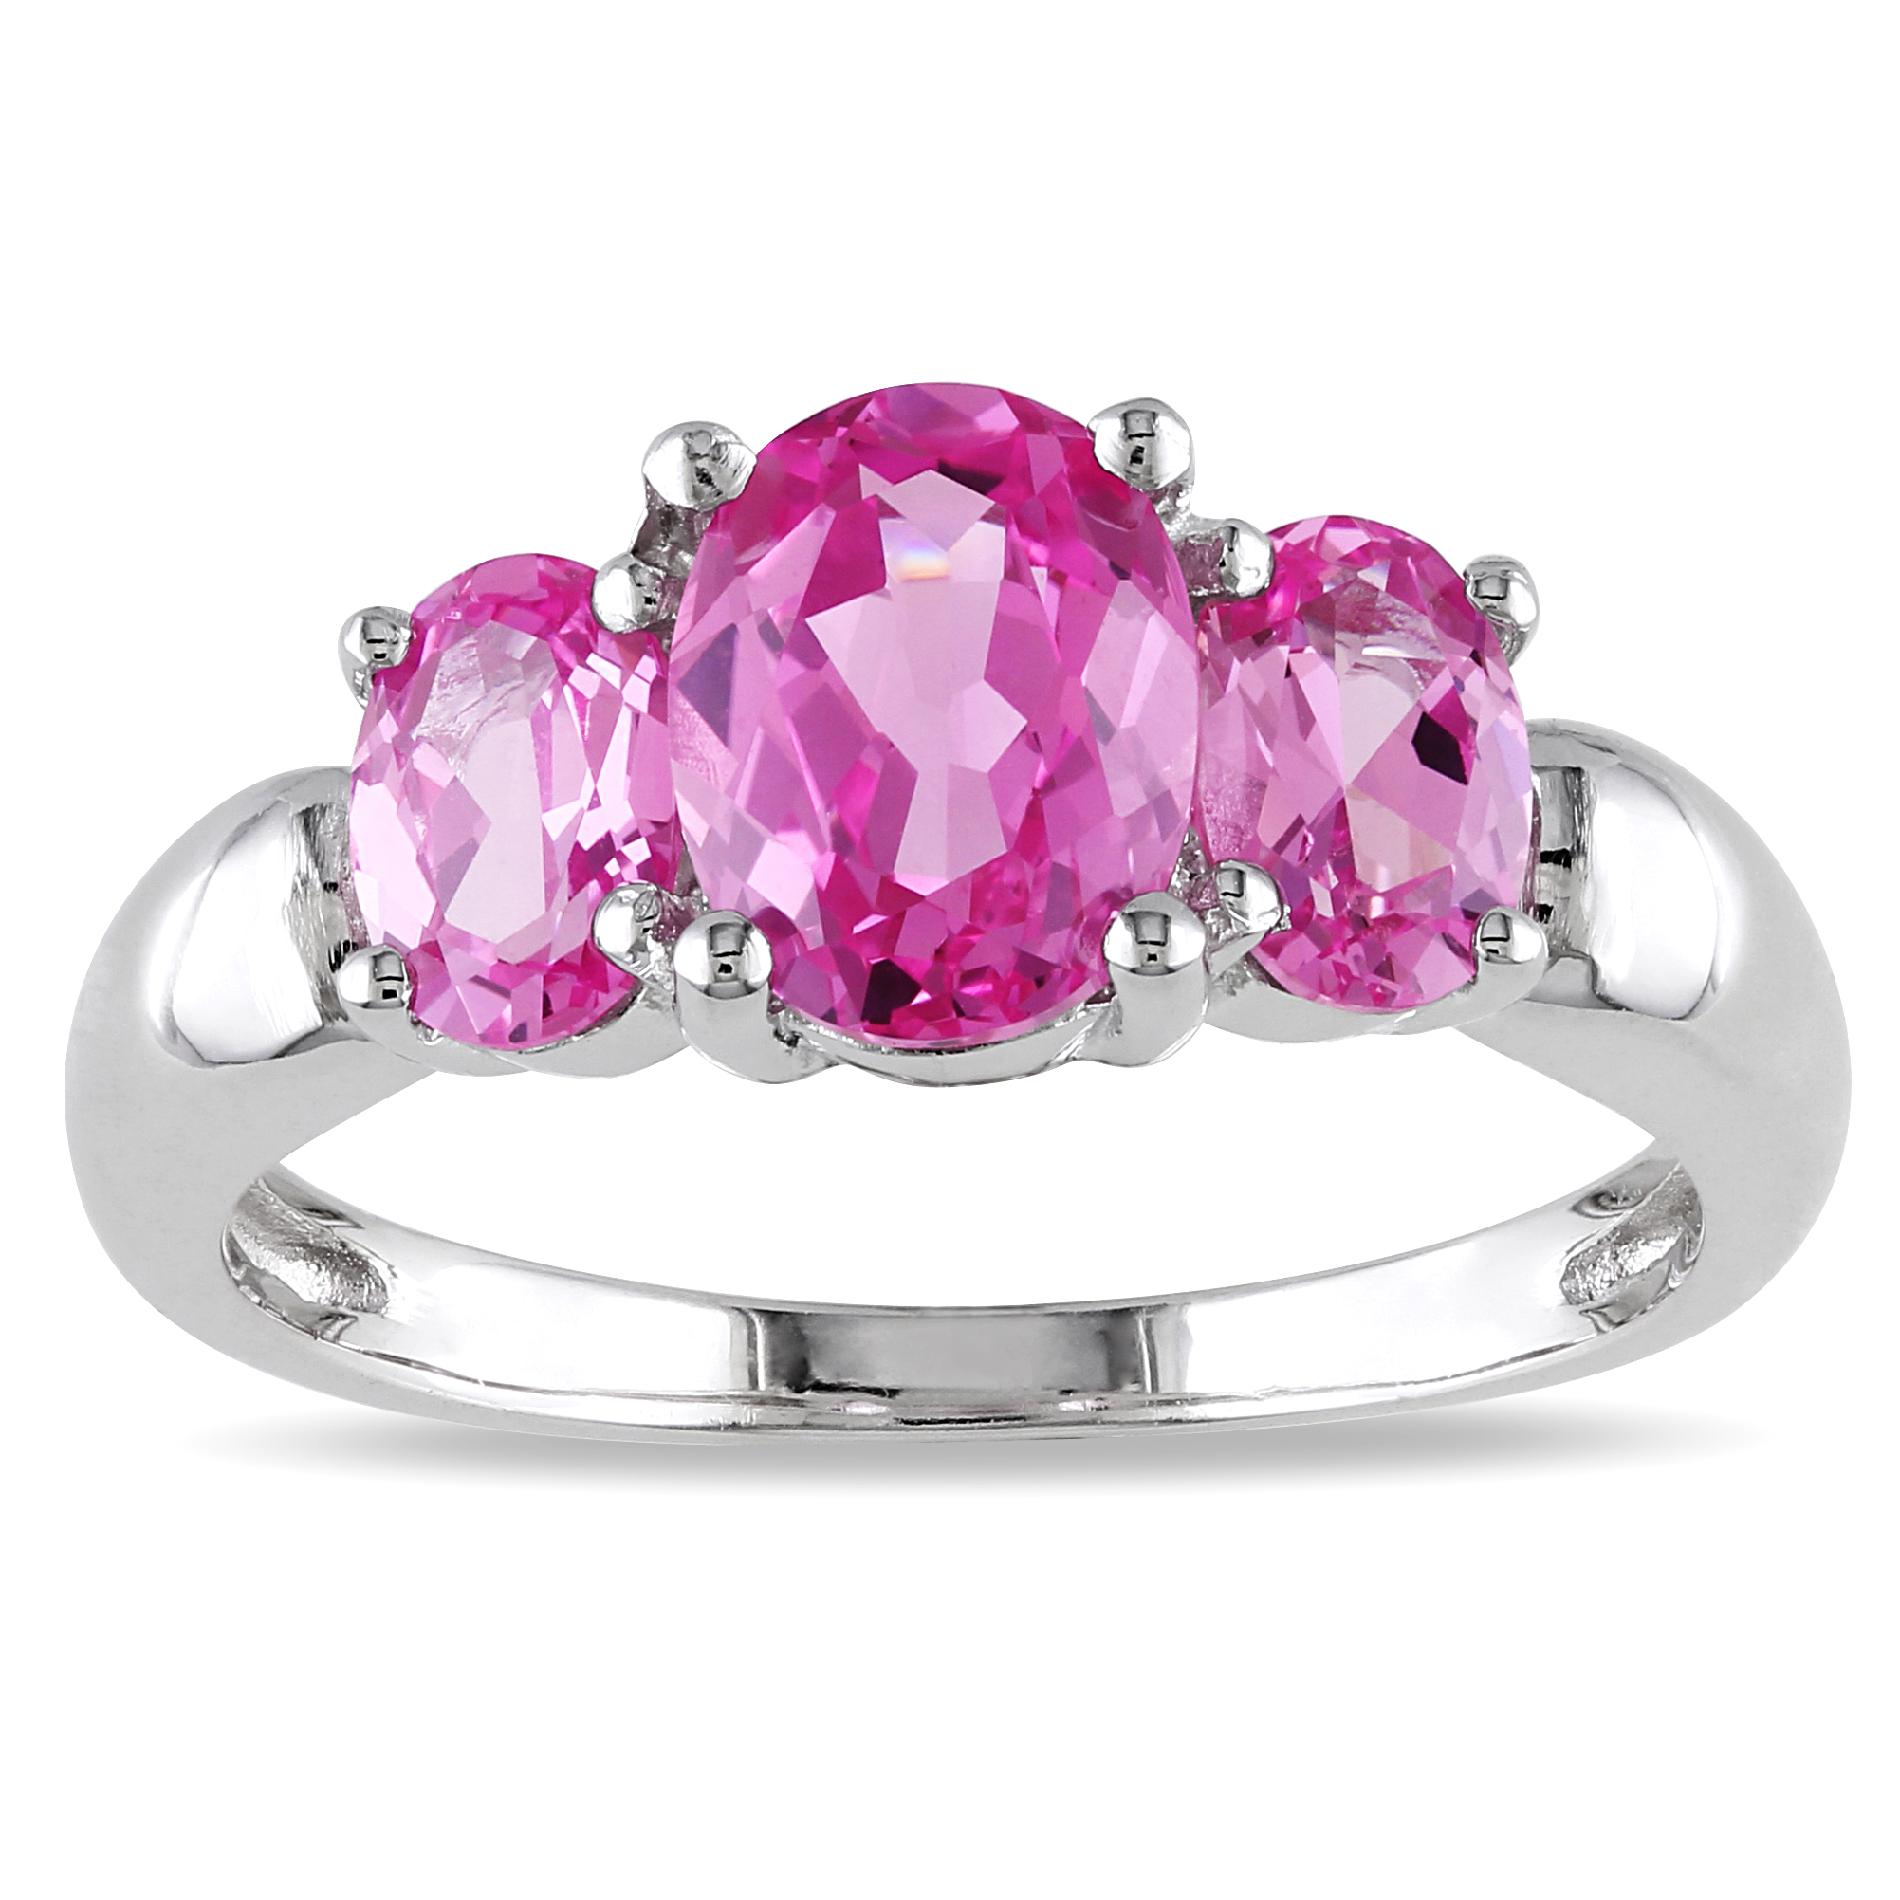 3 1/6 Carat T.G.W. Created Pink Sapphire 3 Stone Ring in Sterling Silver